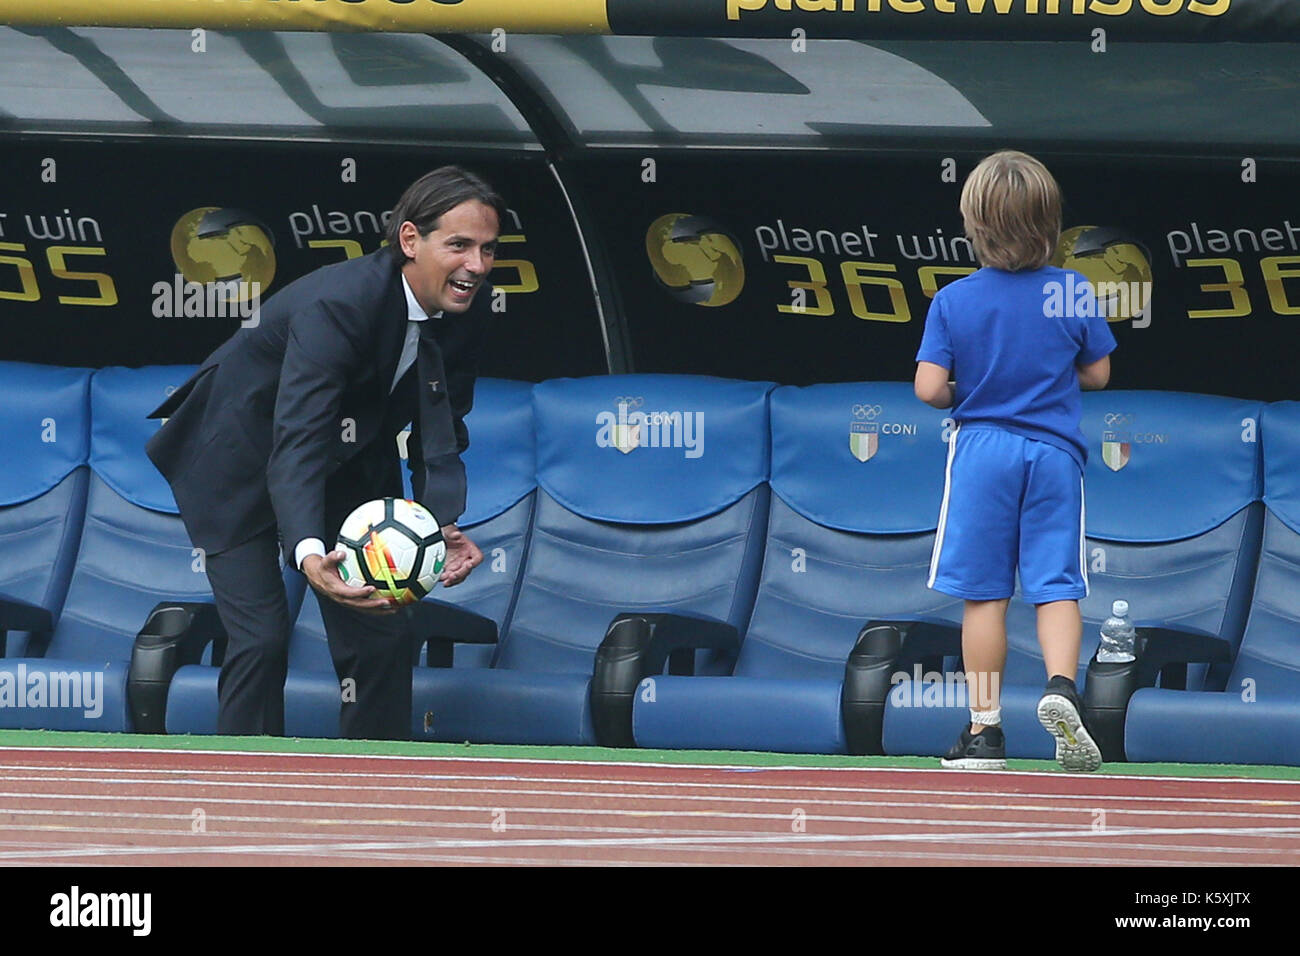 Italy, Rome, September 10, 2017:  Simone Inzaghi with him son at  the end of football  match Serie A Italian league between Lazio vs Milan  in Stadio Olimpico  in Rome on 10 September 2017. Stock Photo